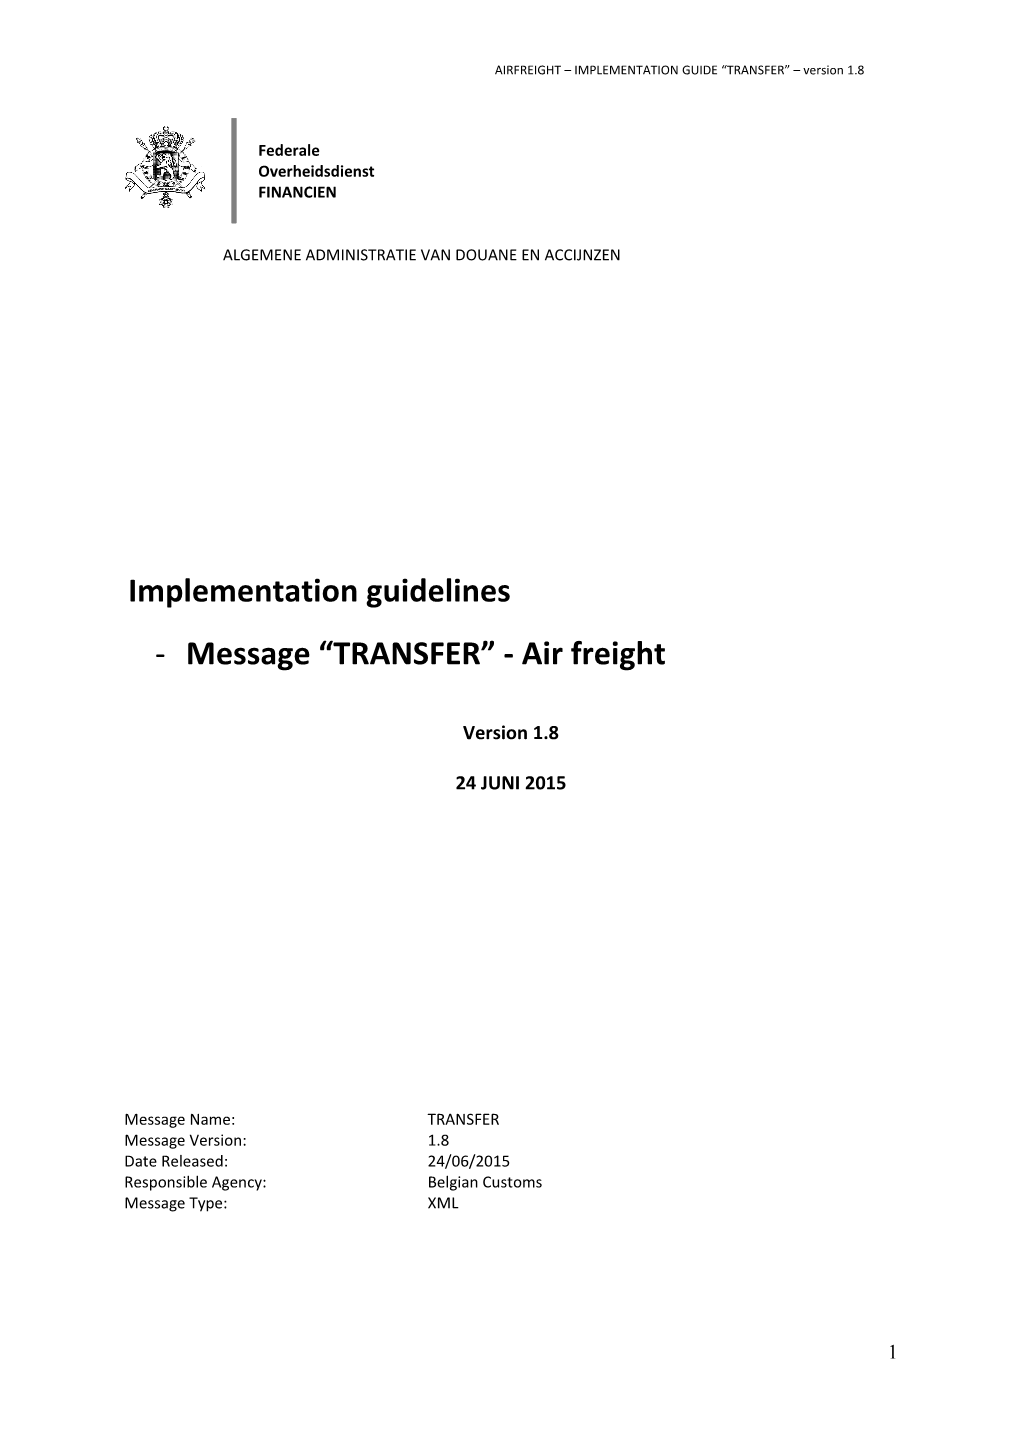 AIRFREIGHT IMPLEMENTATION GUIDE TRANSFER Version 1.8